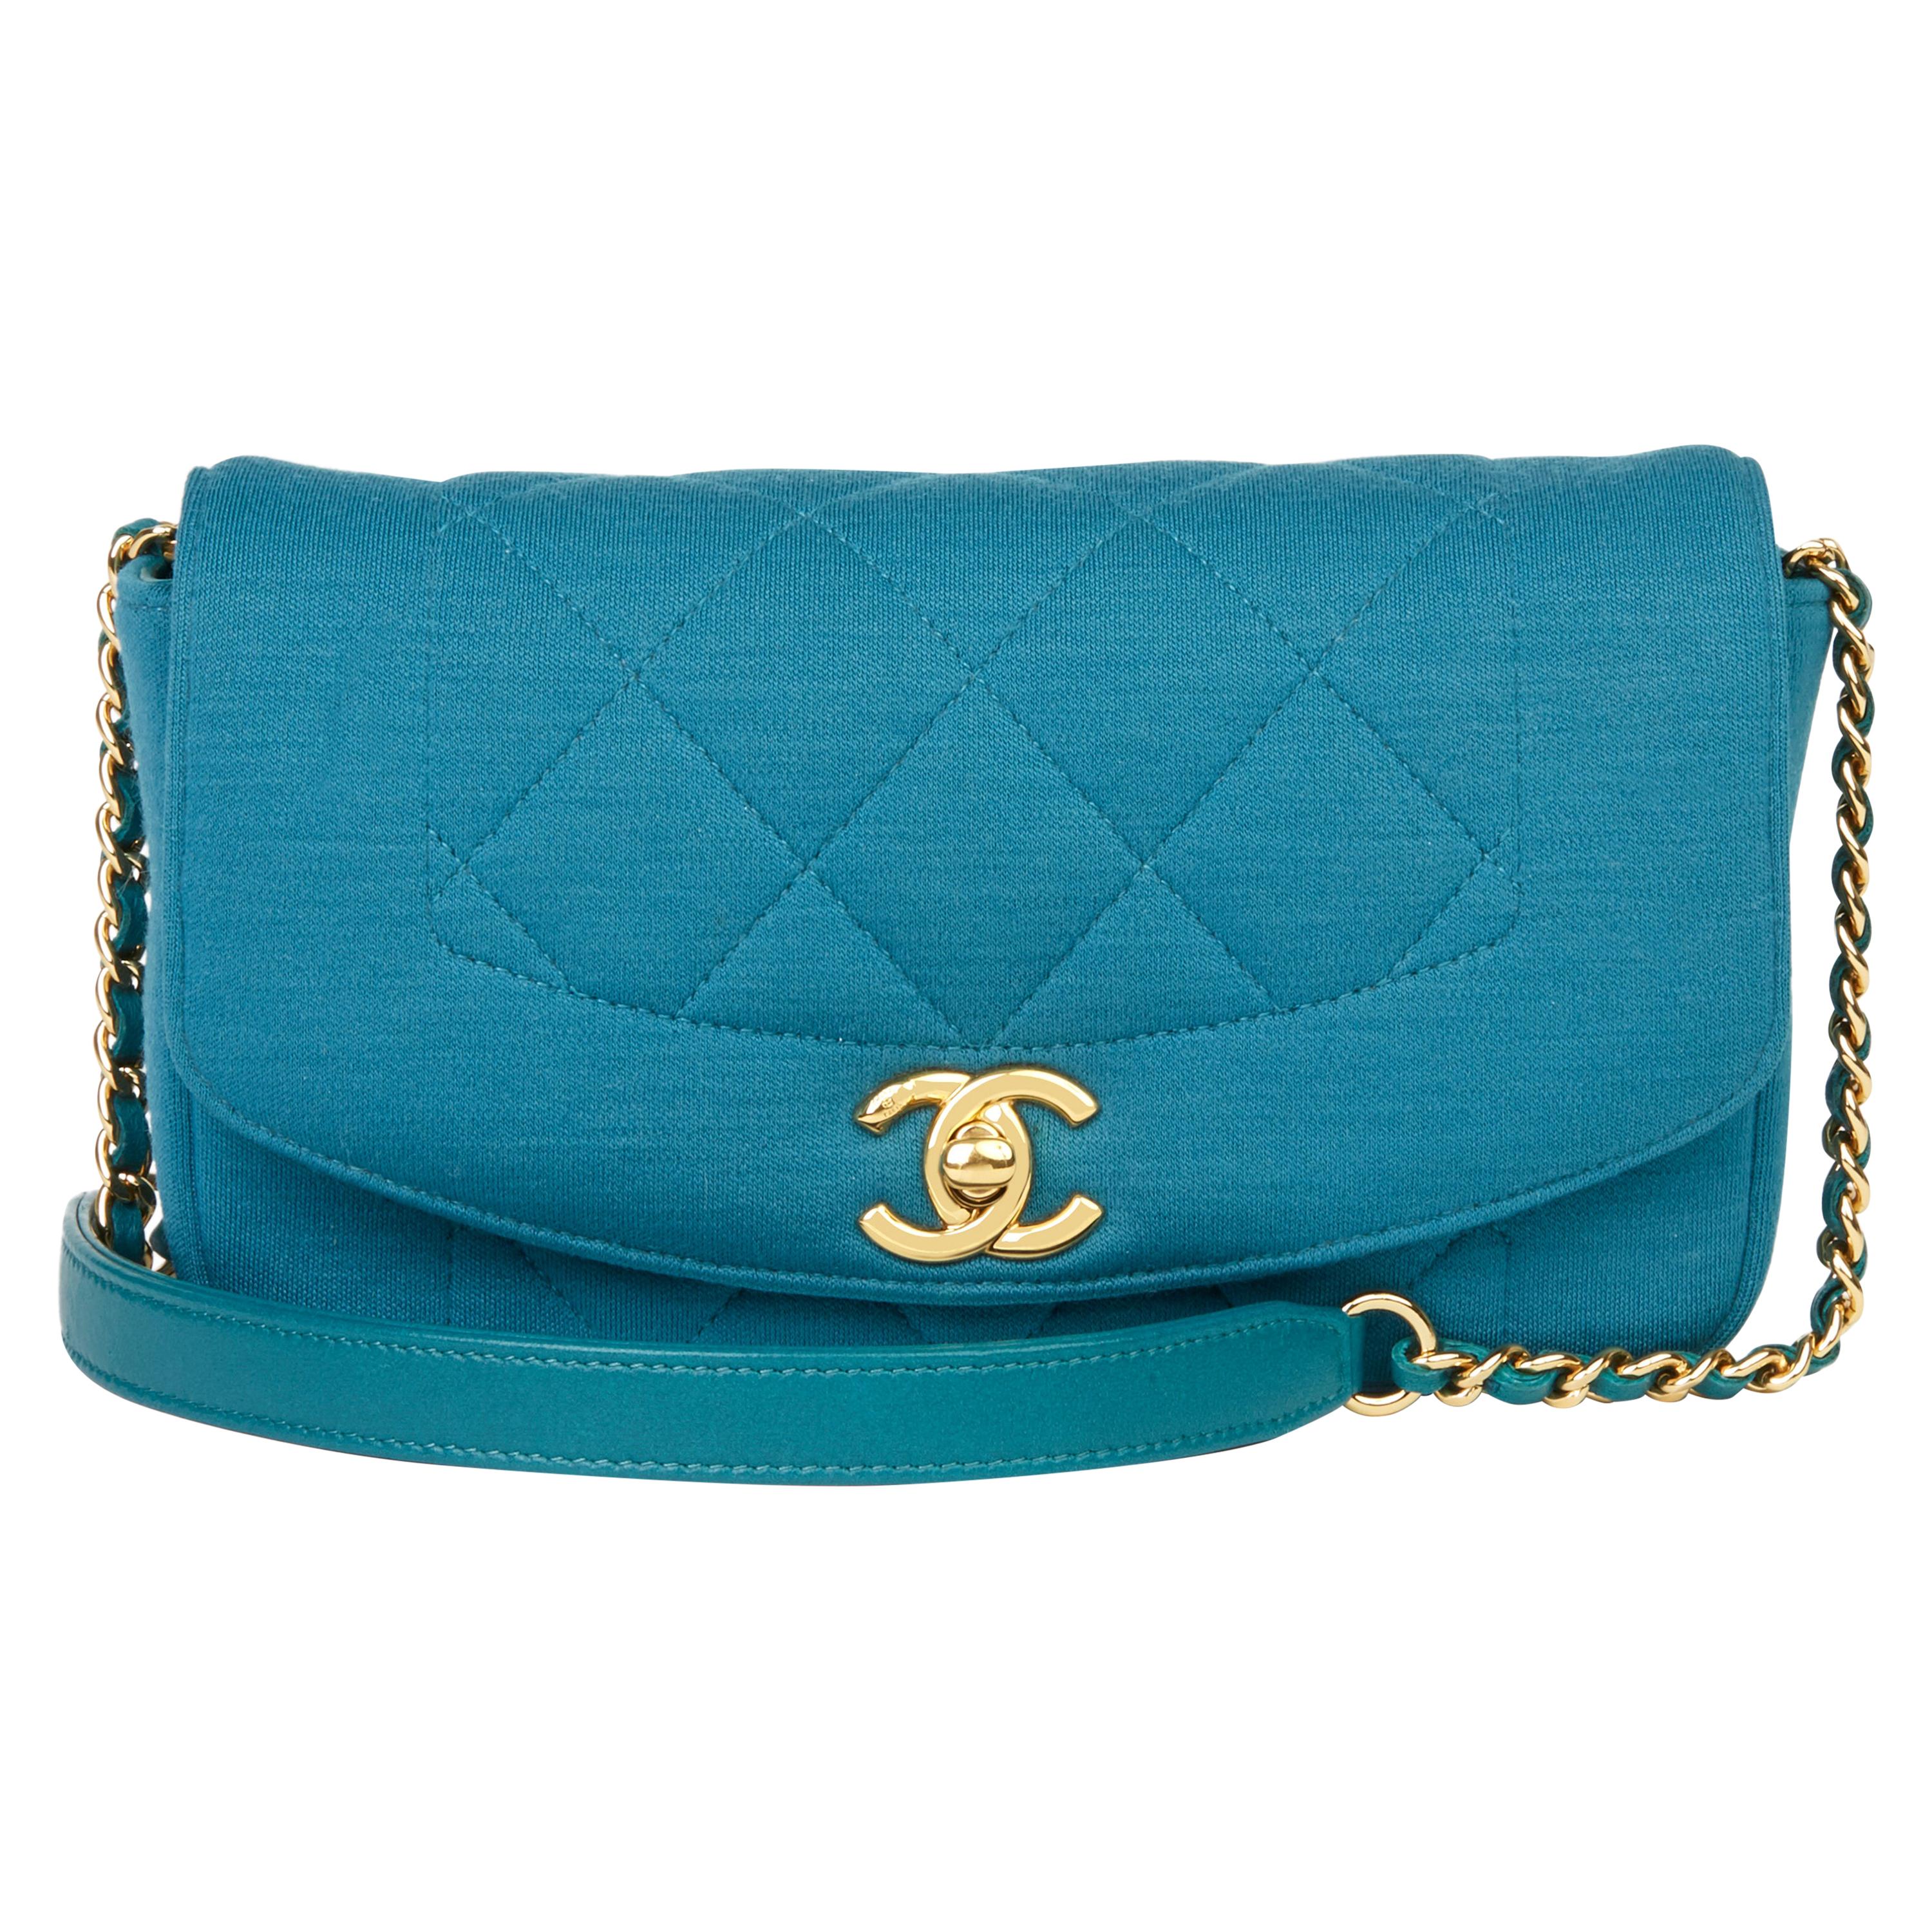 2015 Chanel Teal Jersey Fabric Mini Reissue Diana Classic Single Flap Bag